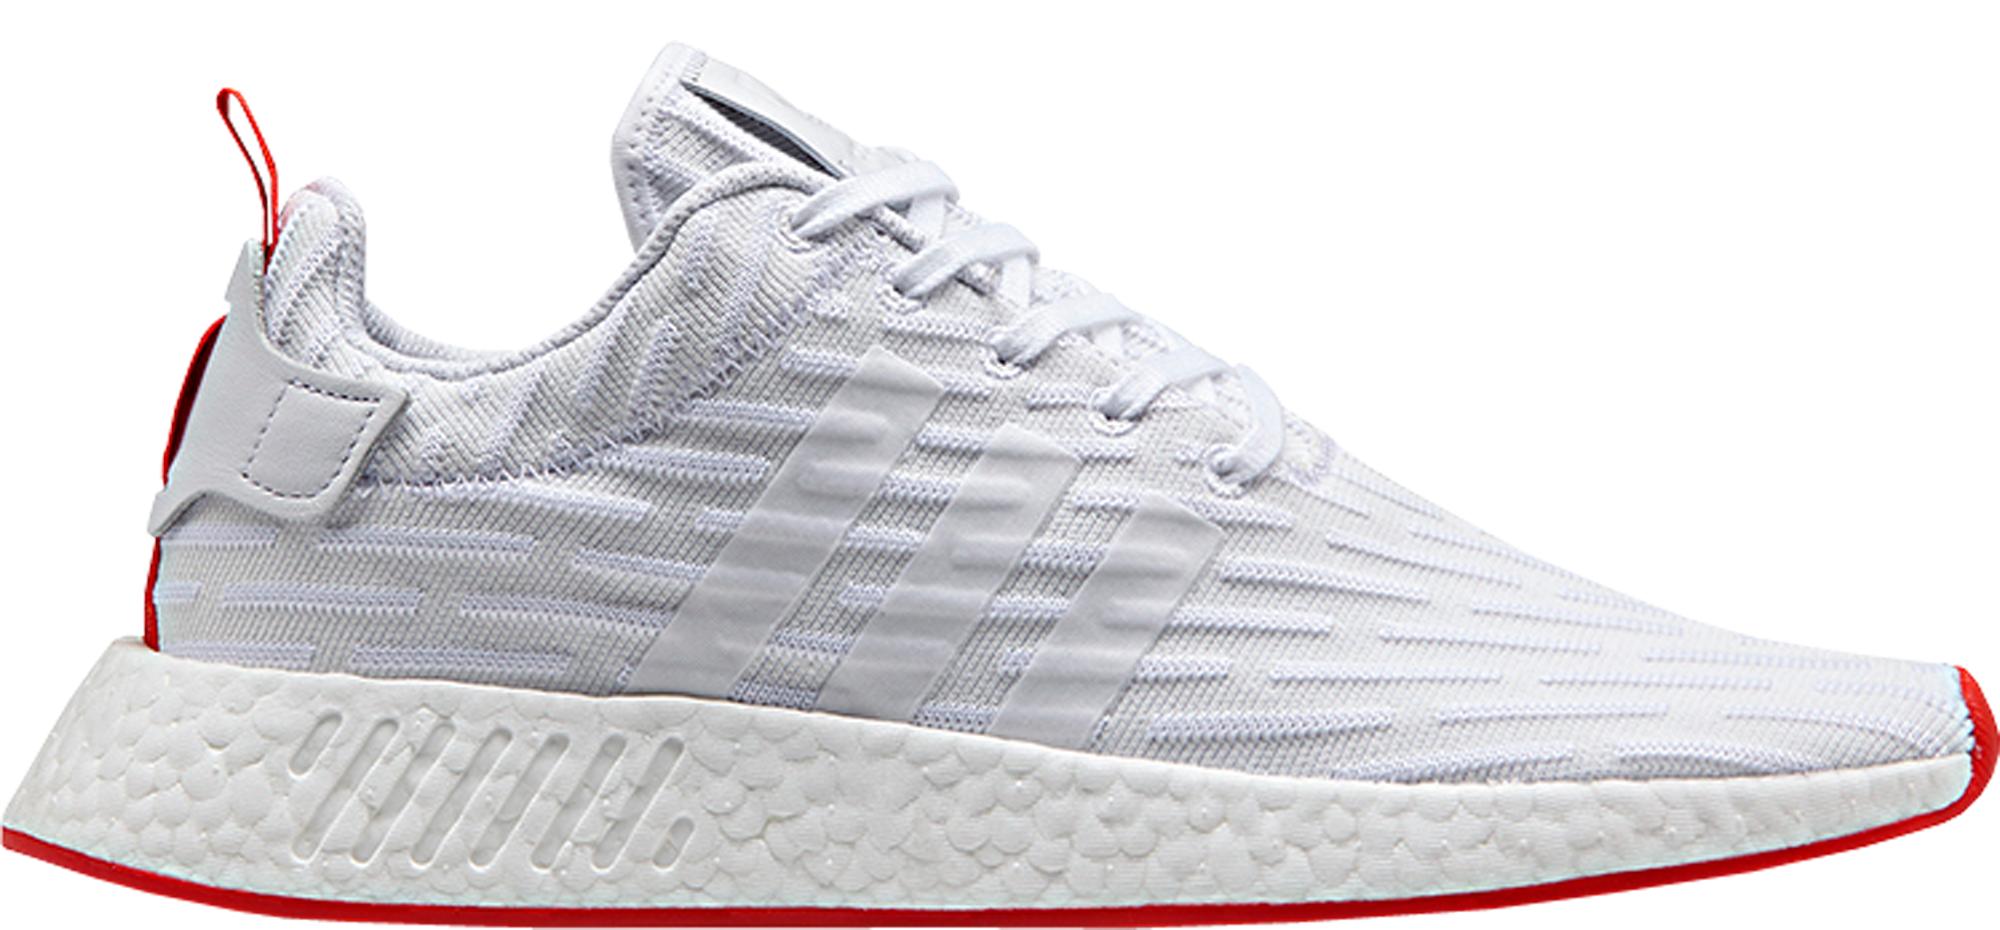 adidas NMD R2 Two-Toned White Red